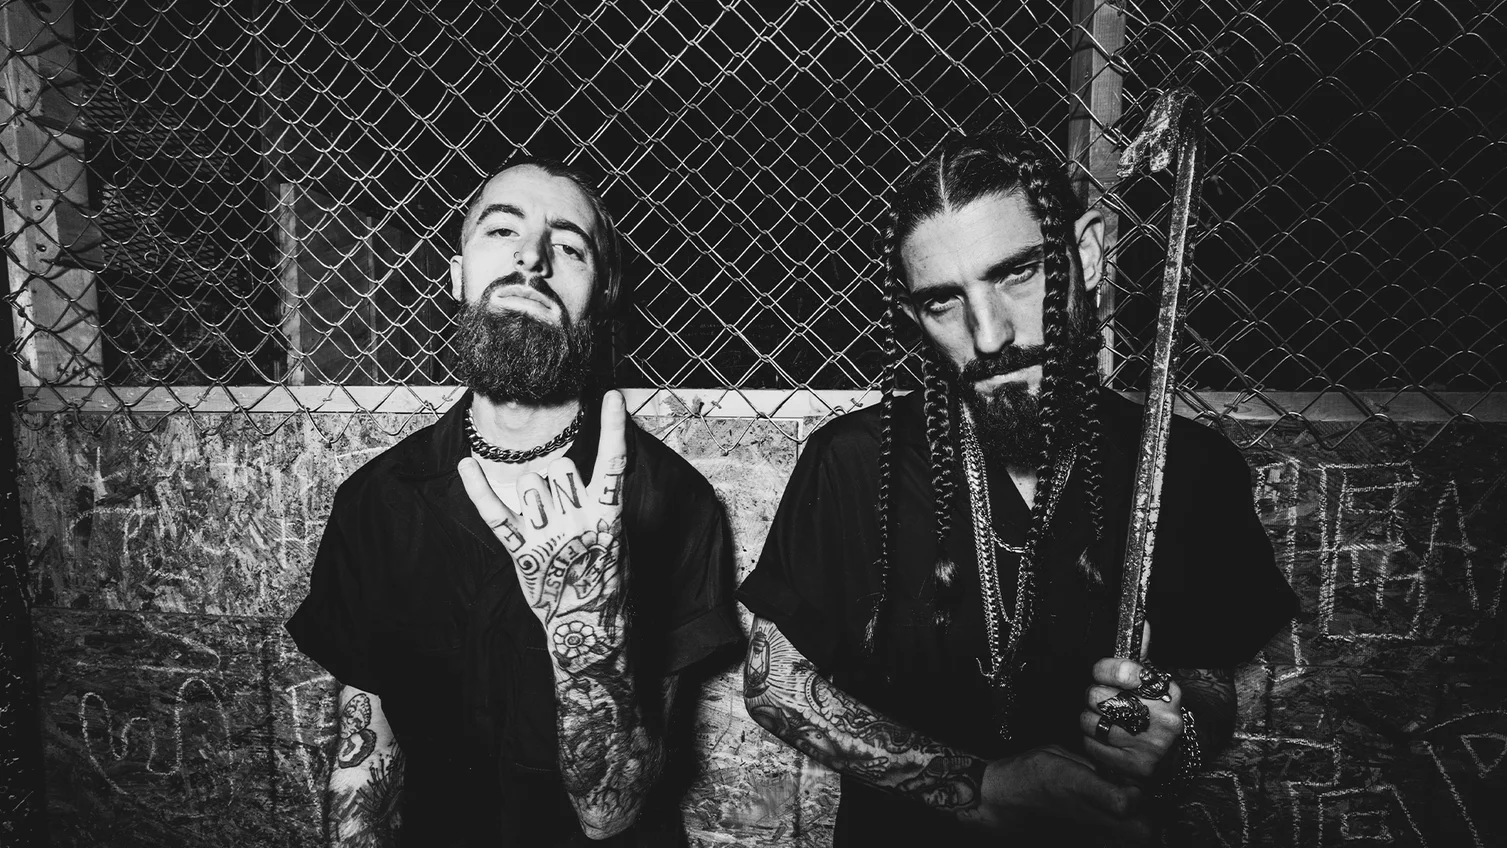 MISSIO – AN INTERVIEW WITH MATTHEW BRUE AND DAVID BUTLER